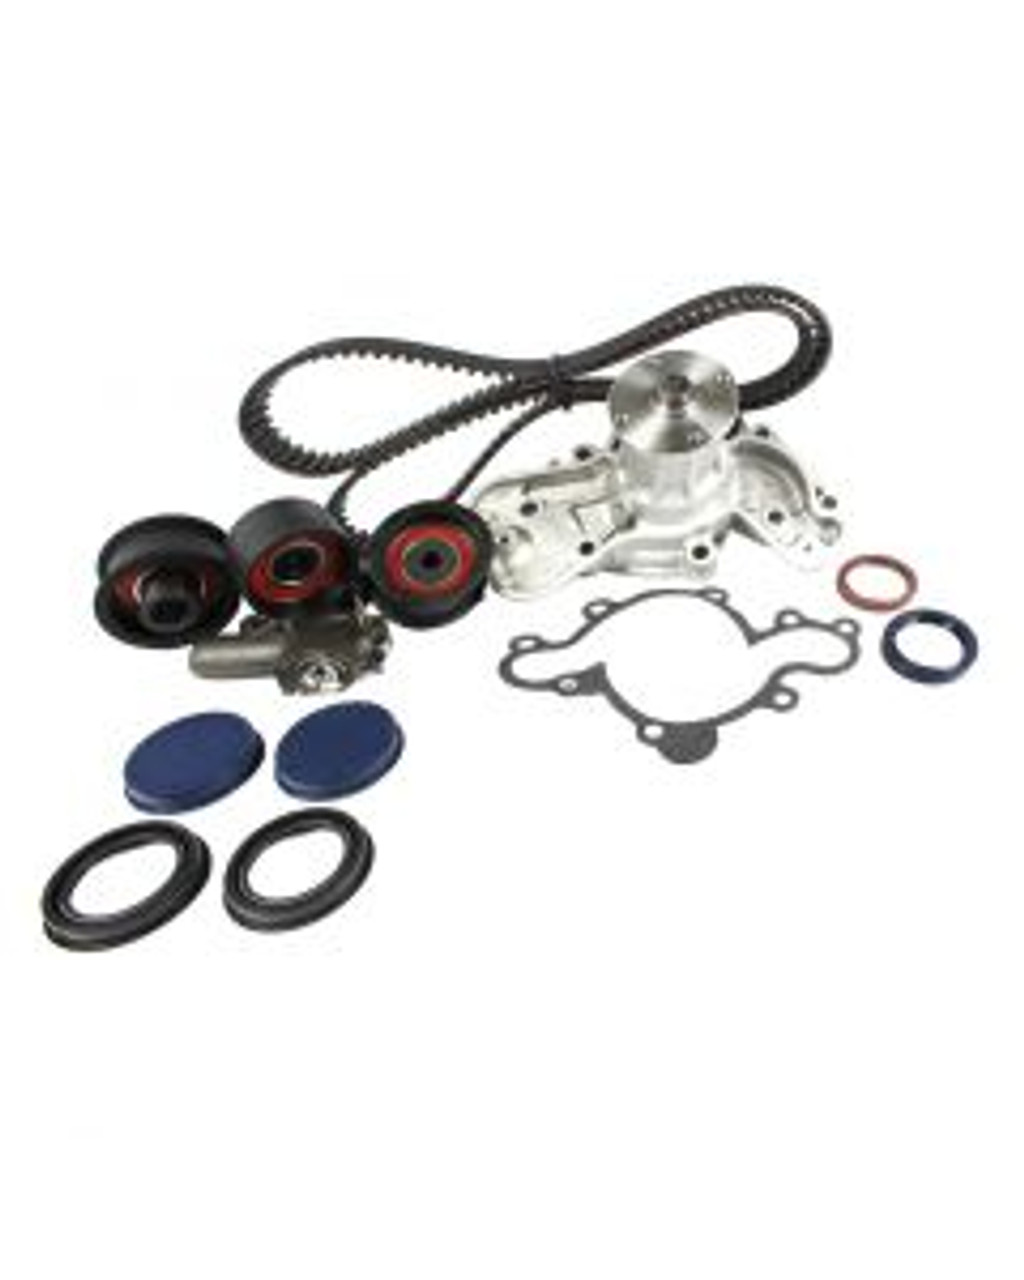 Timing Belt Kit with Water Pump 3.0L 1990 Mazda 929 - TBK470WP.3